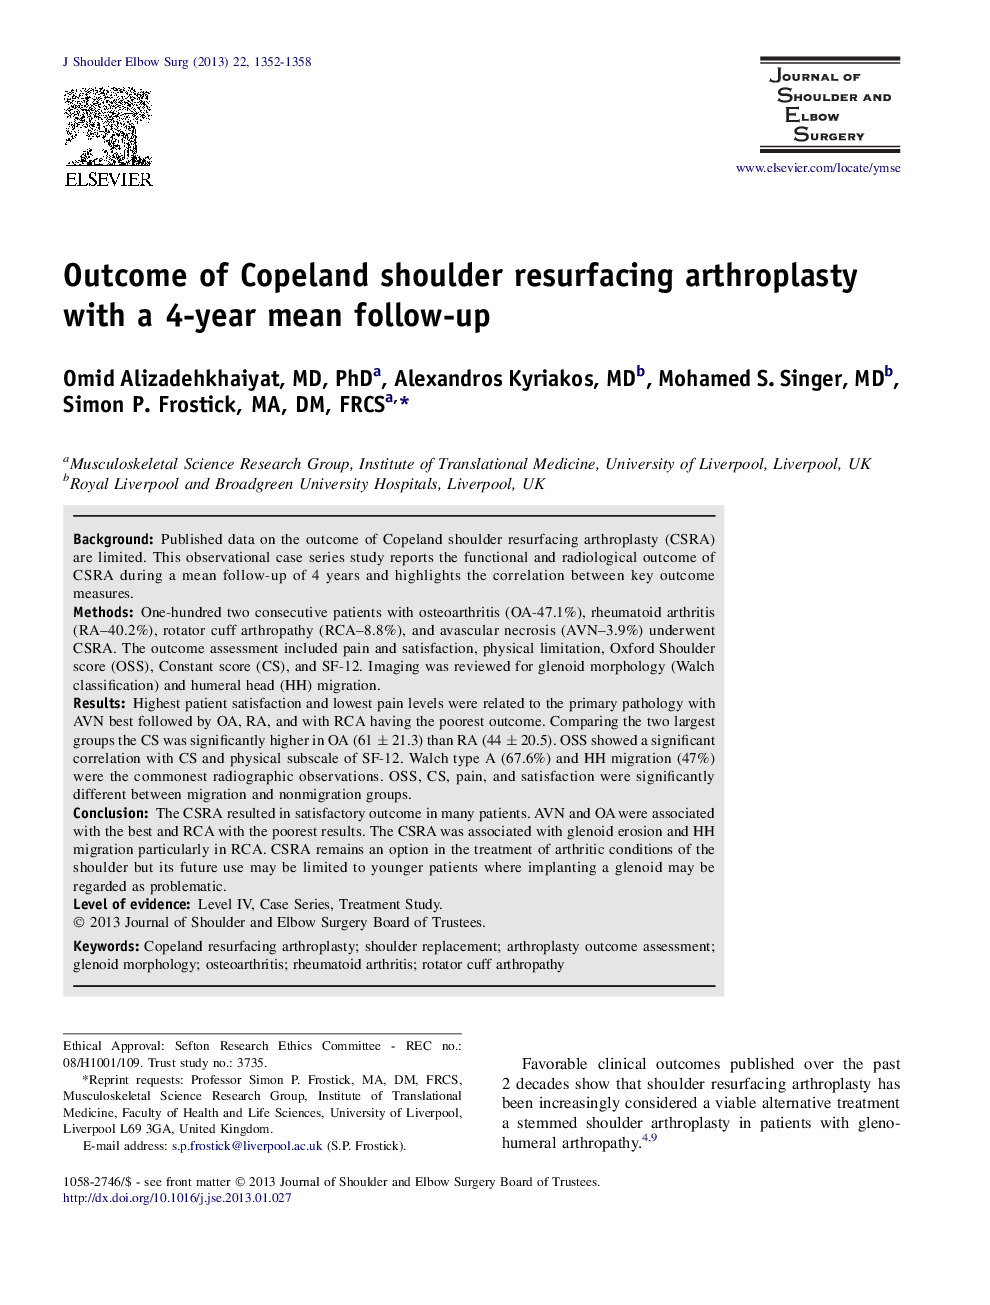 Outcome of Copeland shoulder resurfacing arthroplasty with a 4-year mean follow-up 